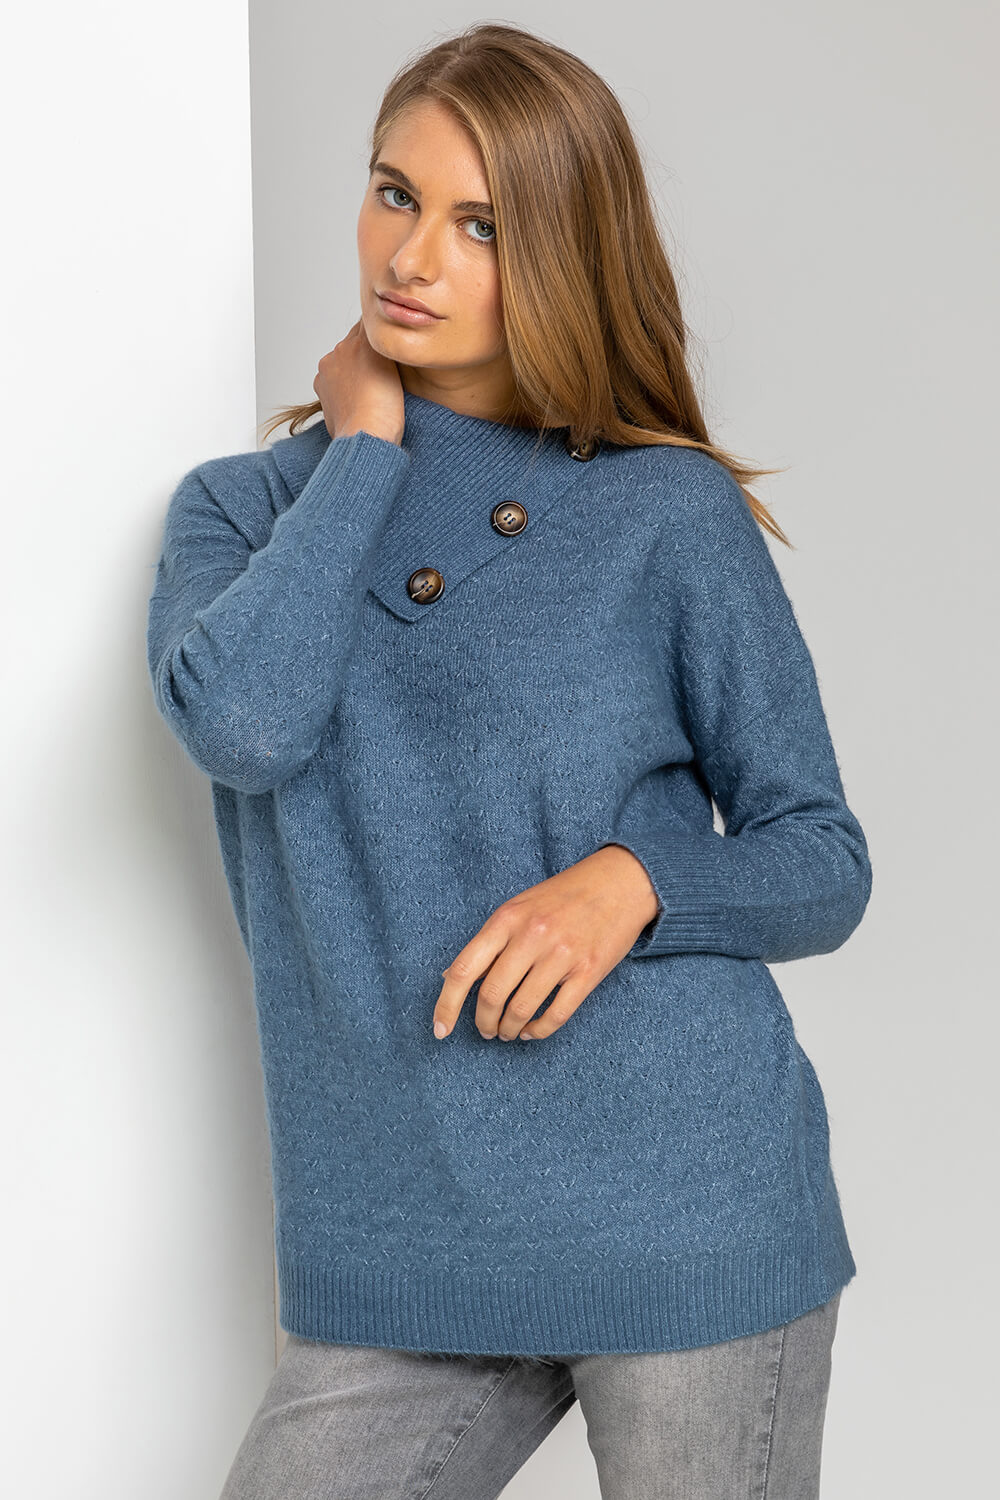 Blue Textured Cowl Neck Button Jumper, Image 3 of 5